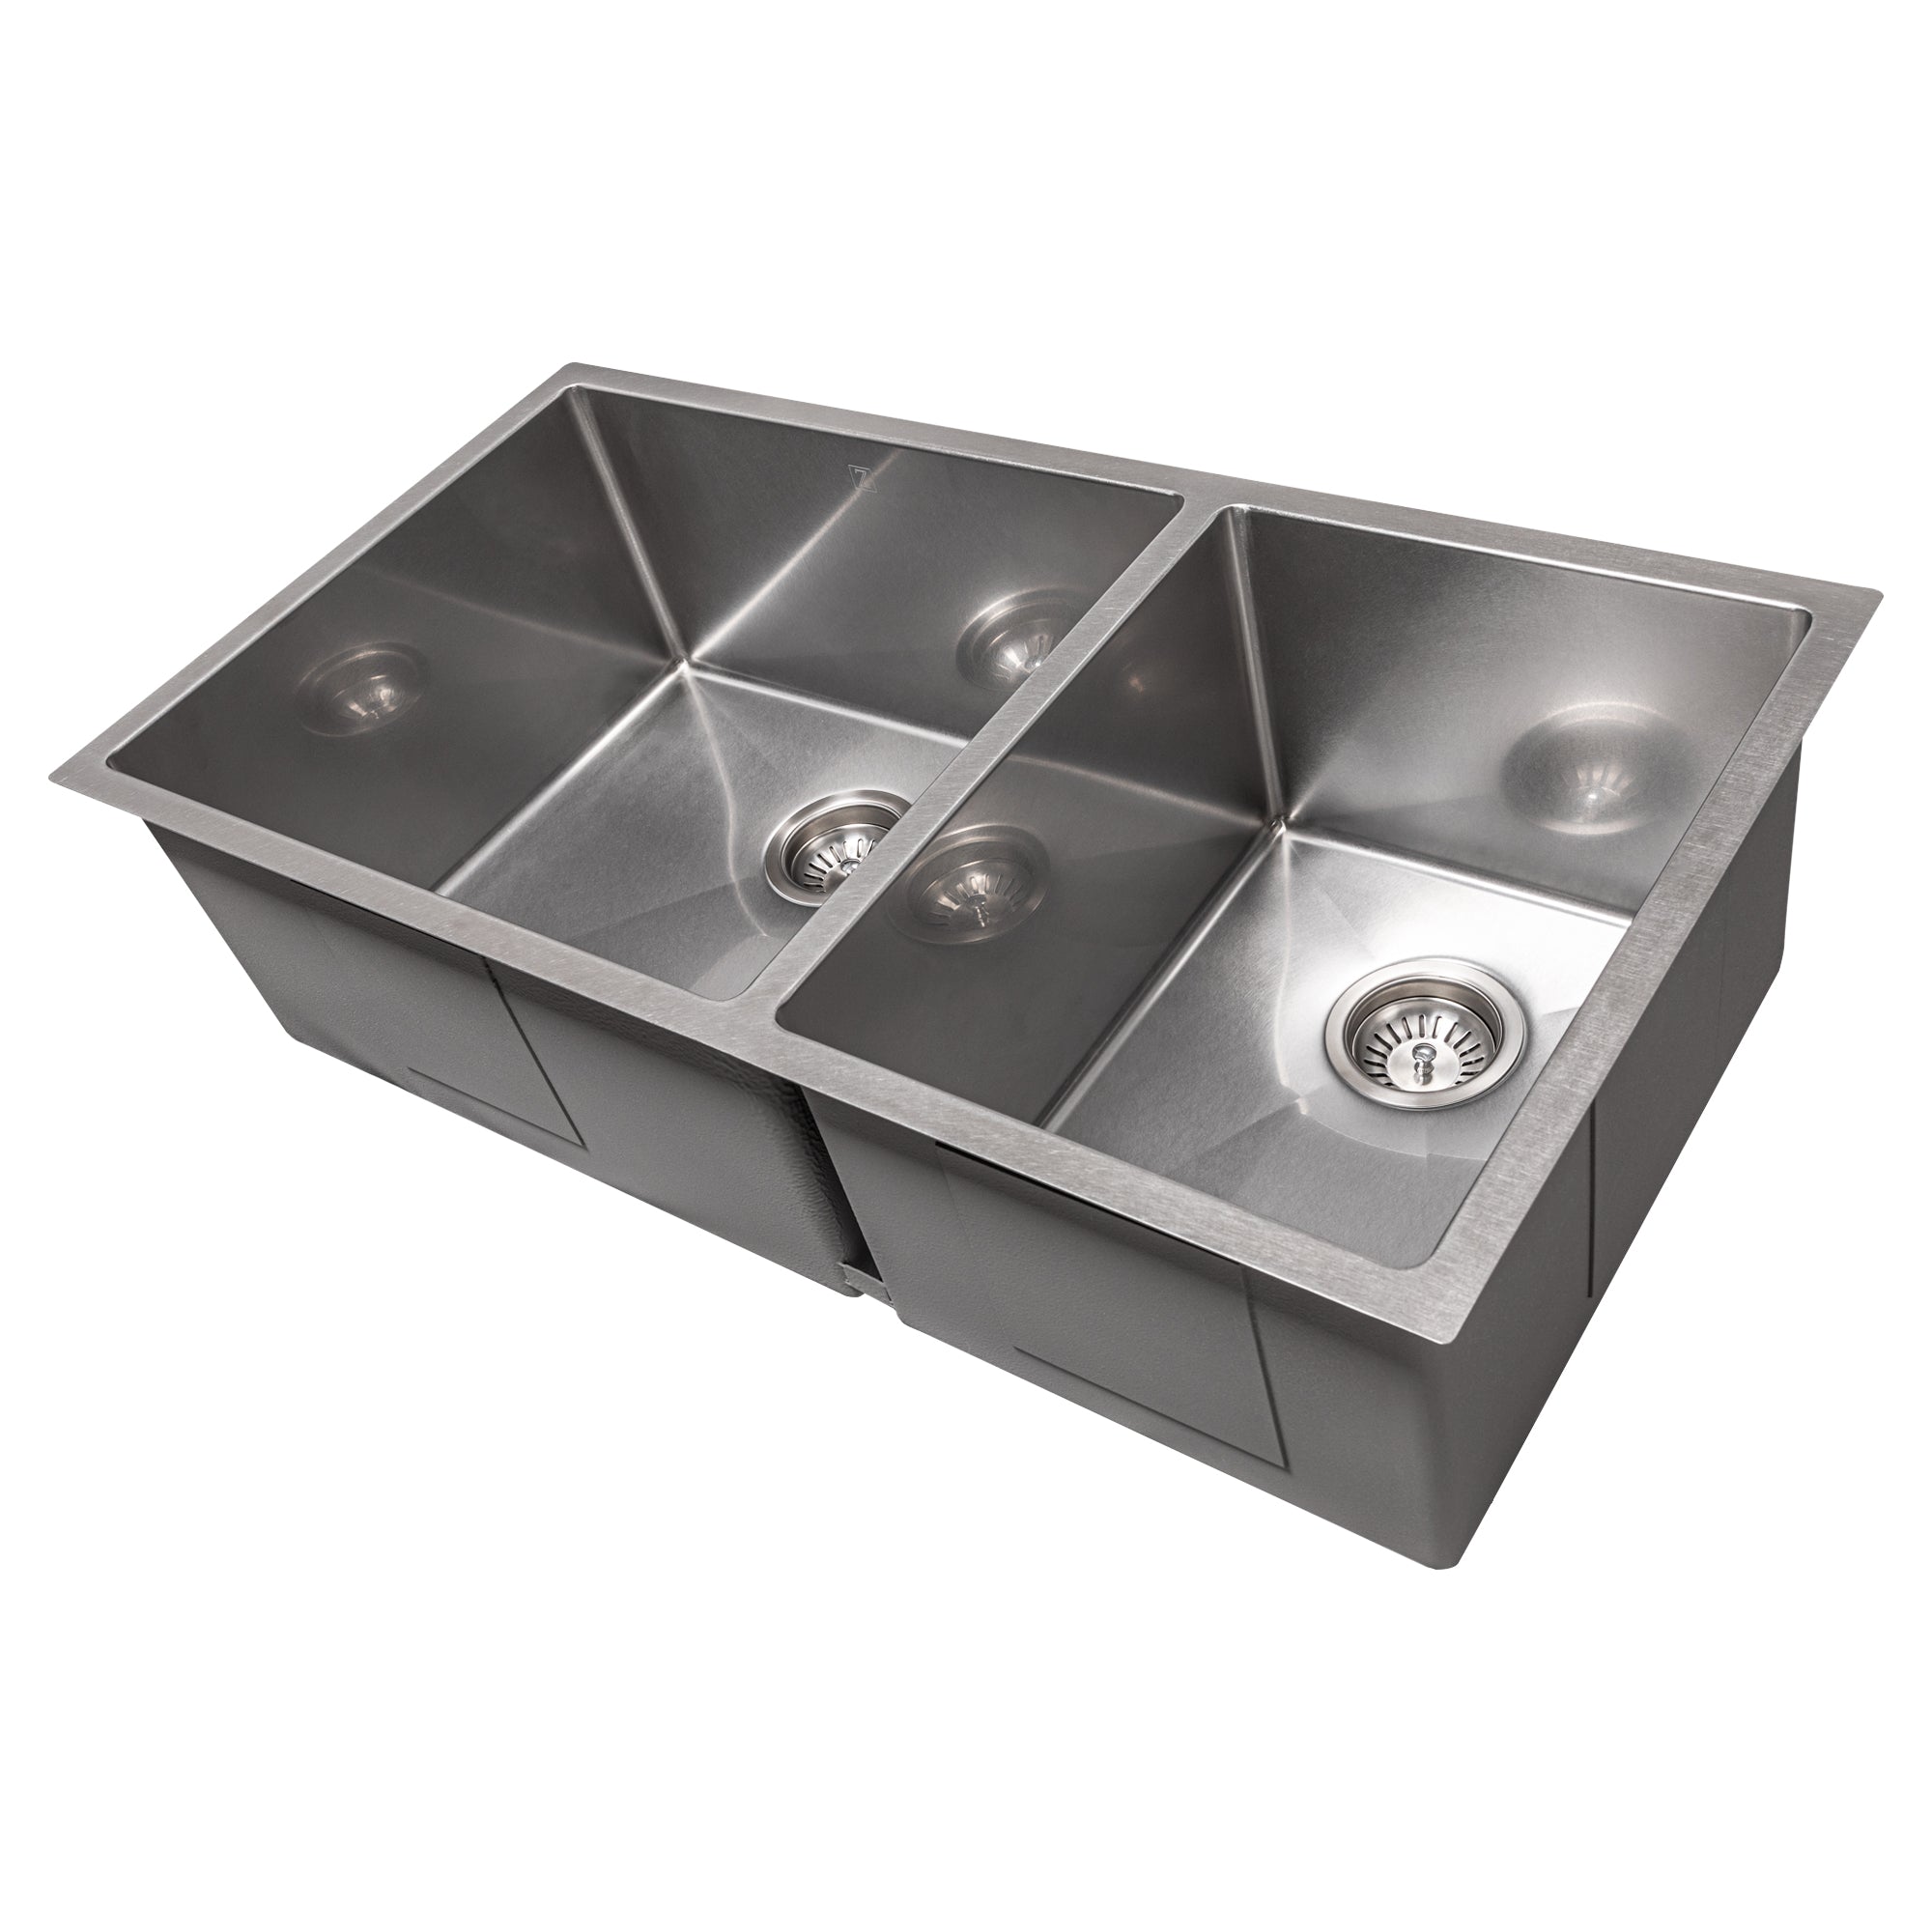 ZLINE 36 in. Chamonix Undermount Double Bowl Kitchen Sink with Bottom Grid (SR60D-36) Side View with reflections in stainless steel